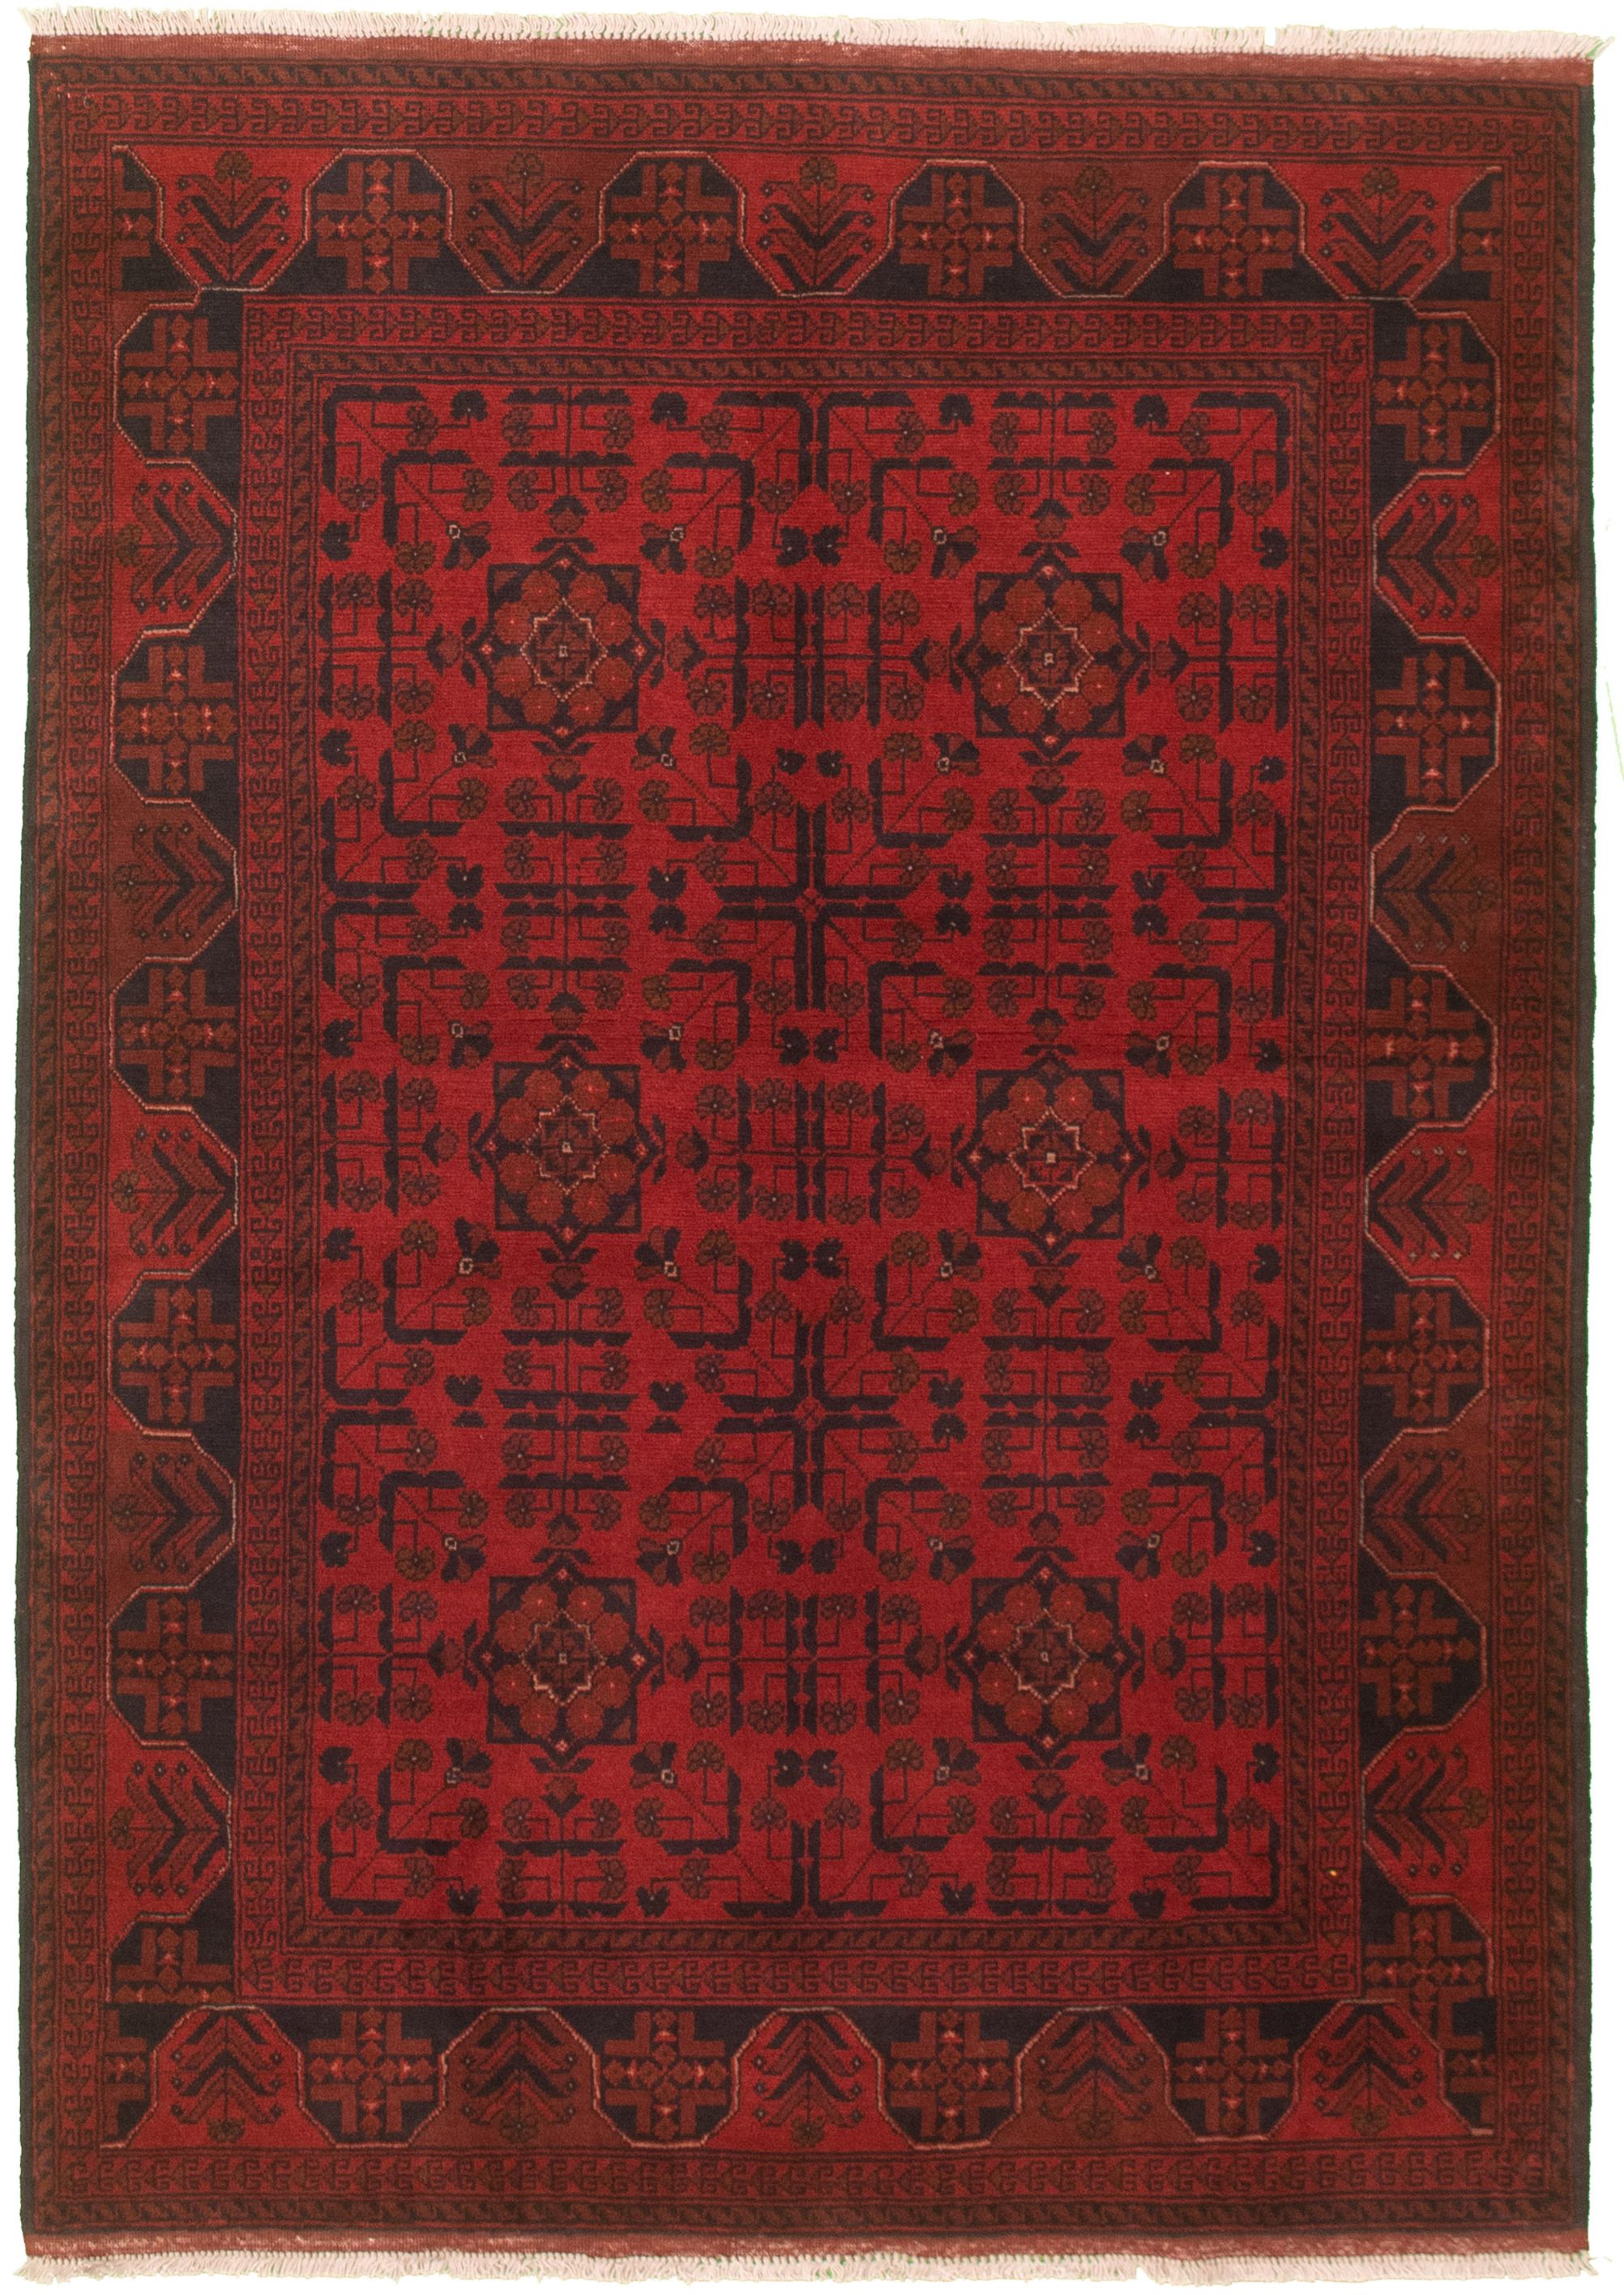 Hand-knotted Finest Khal Mohammadi Red Wool Rug 4'3" x 6'2"  Size: 4'3" x 6'2"  